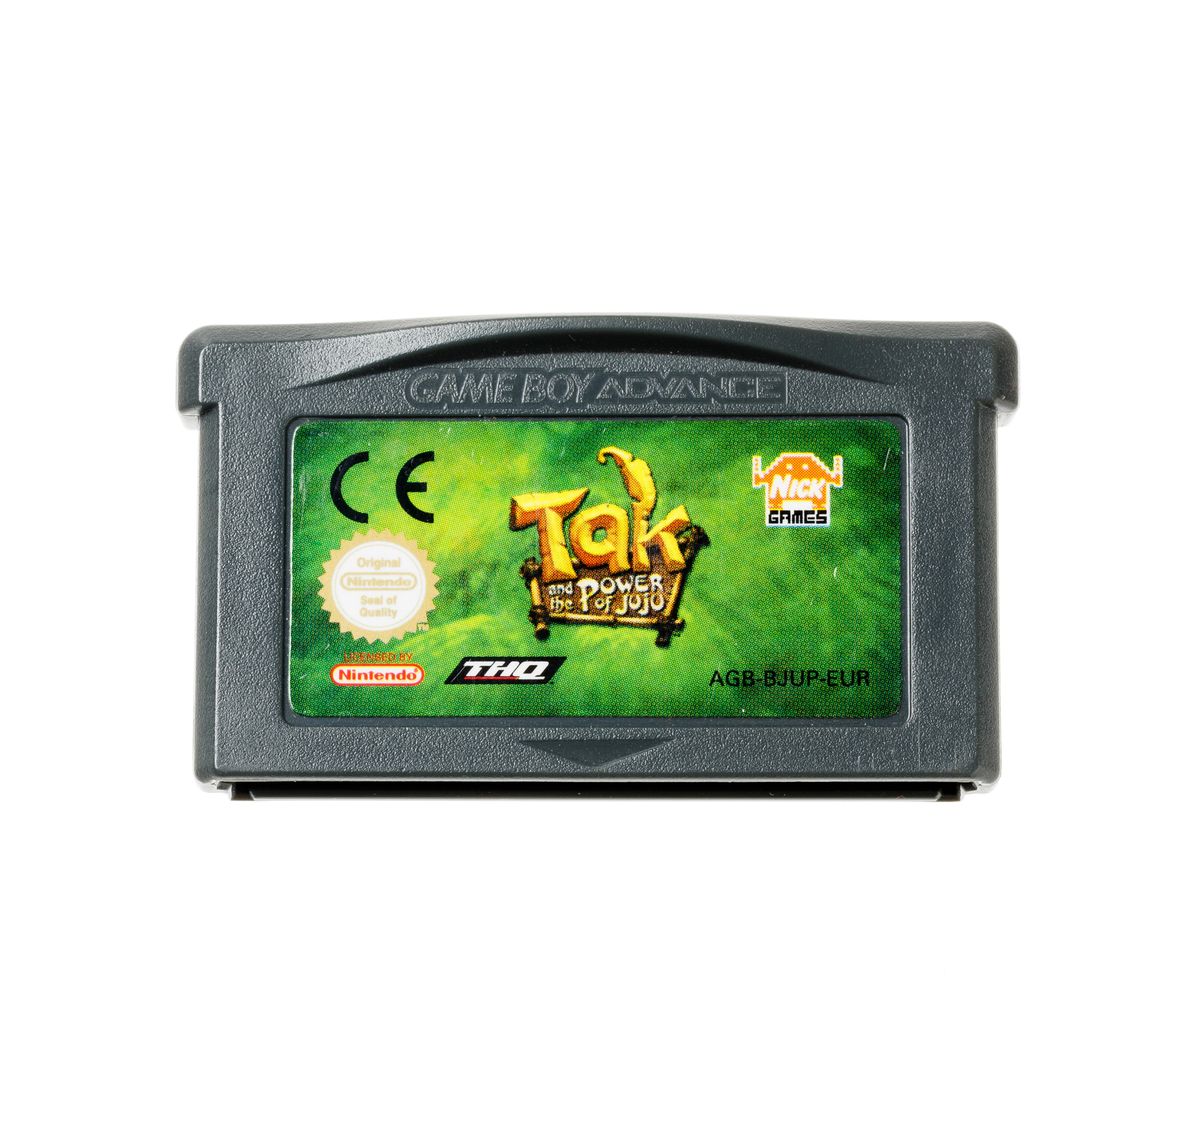 Tak and the Power of JuJu - Gameboy Advance Games